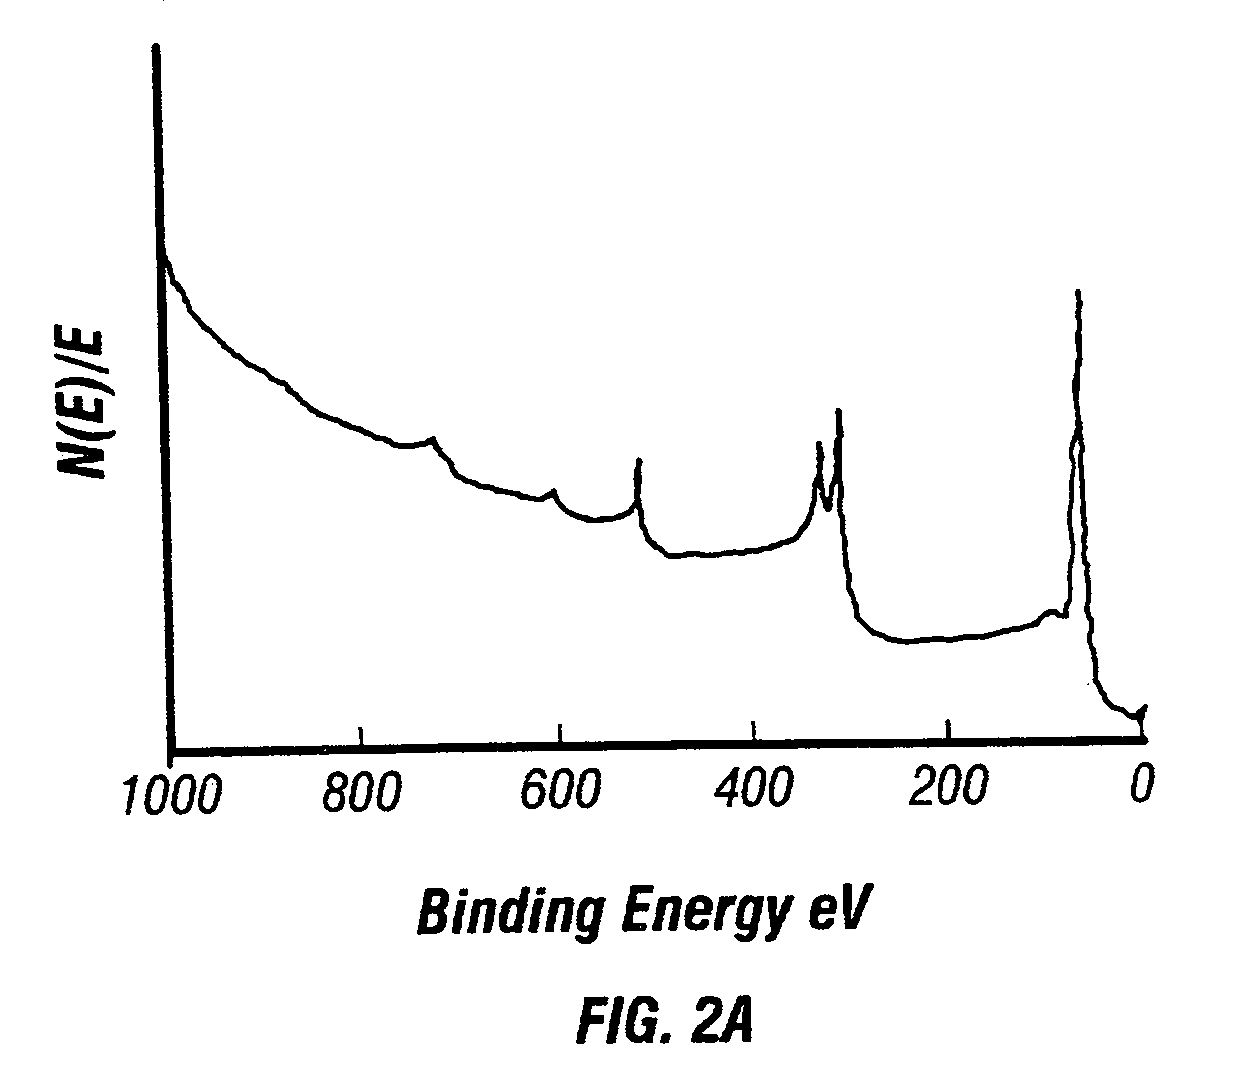 Chemical fluid deposition for the formation of metal and metal alloy films on patterned and unpatterned substrates